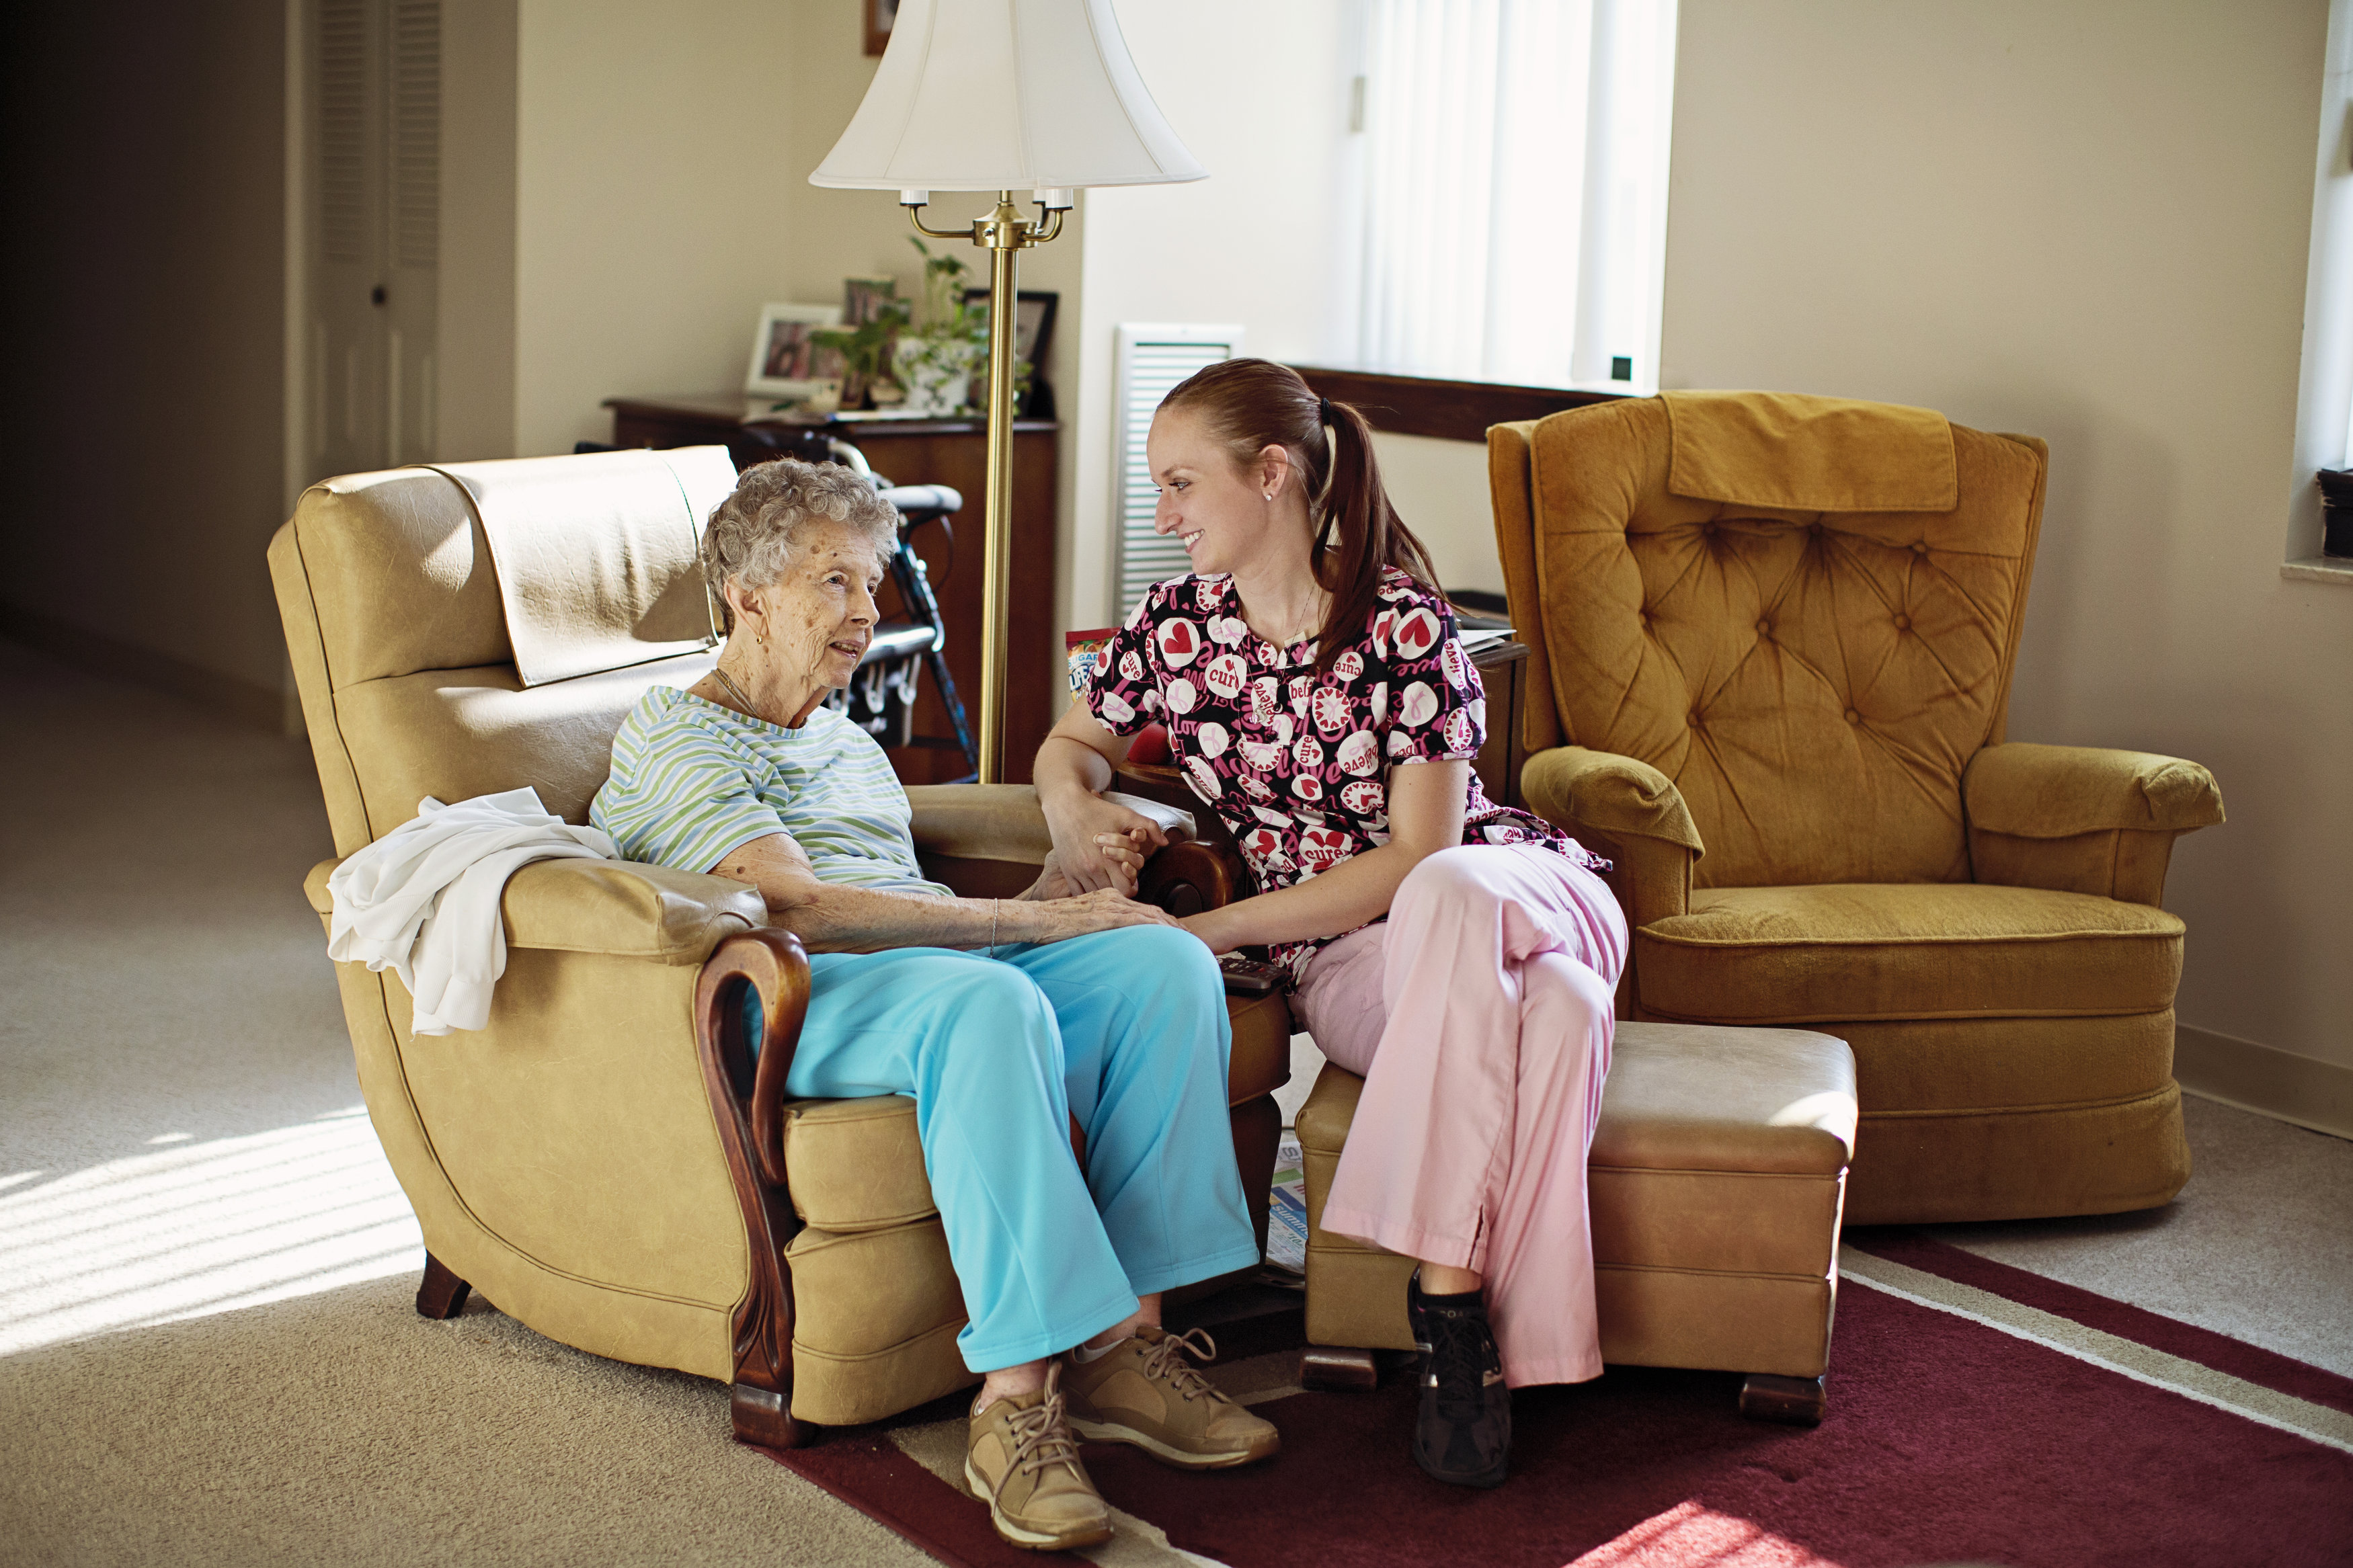 Home Health Caregiver sitting & holding hands of elderly companion care patient.